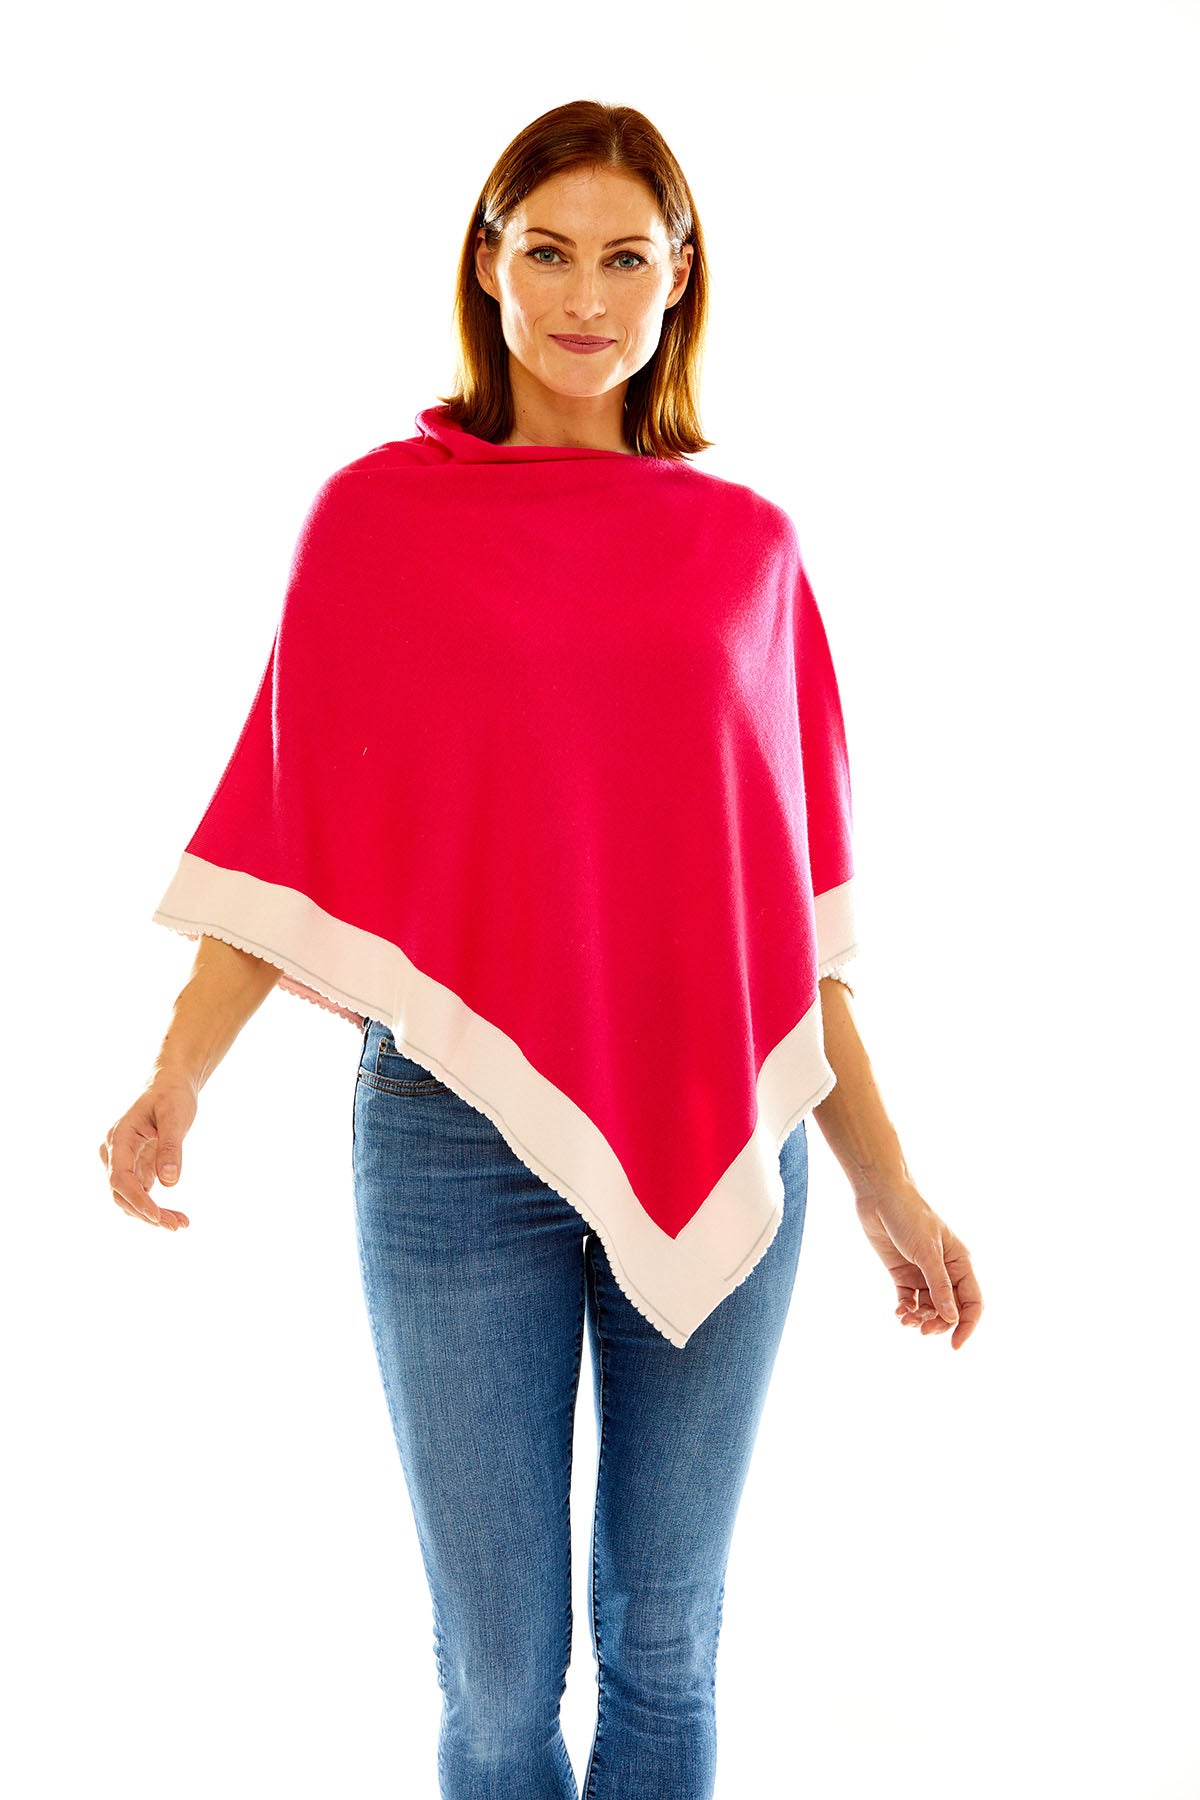 Woman in pink poncho